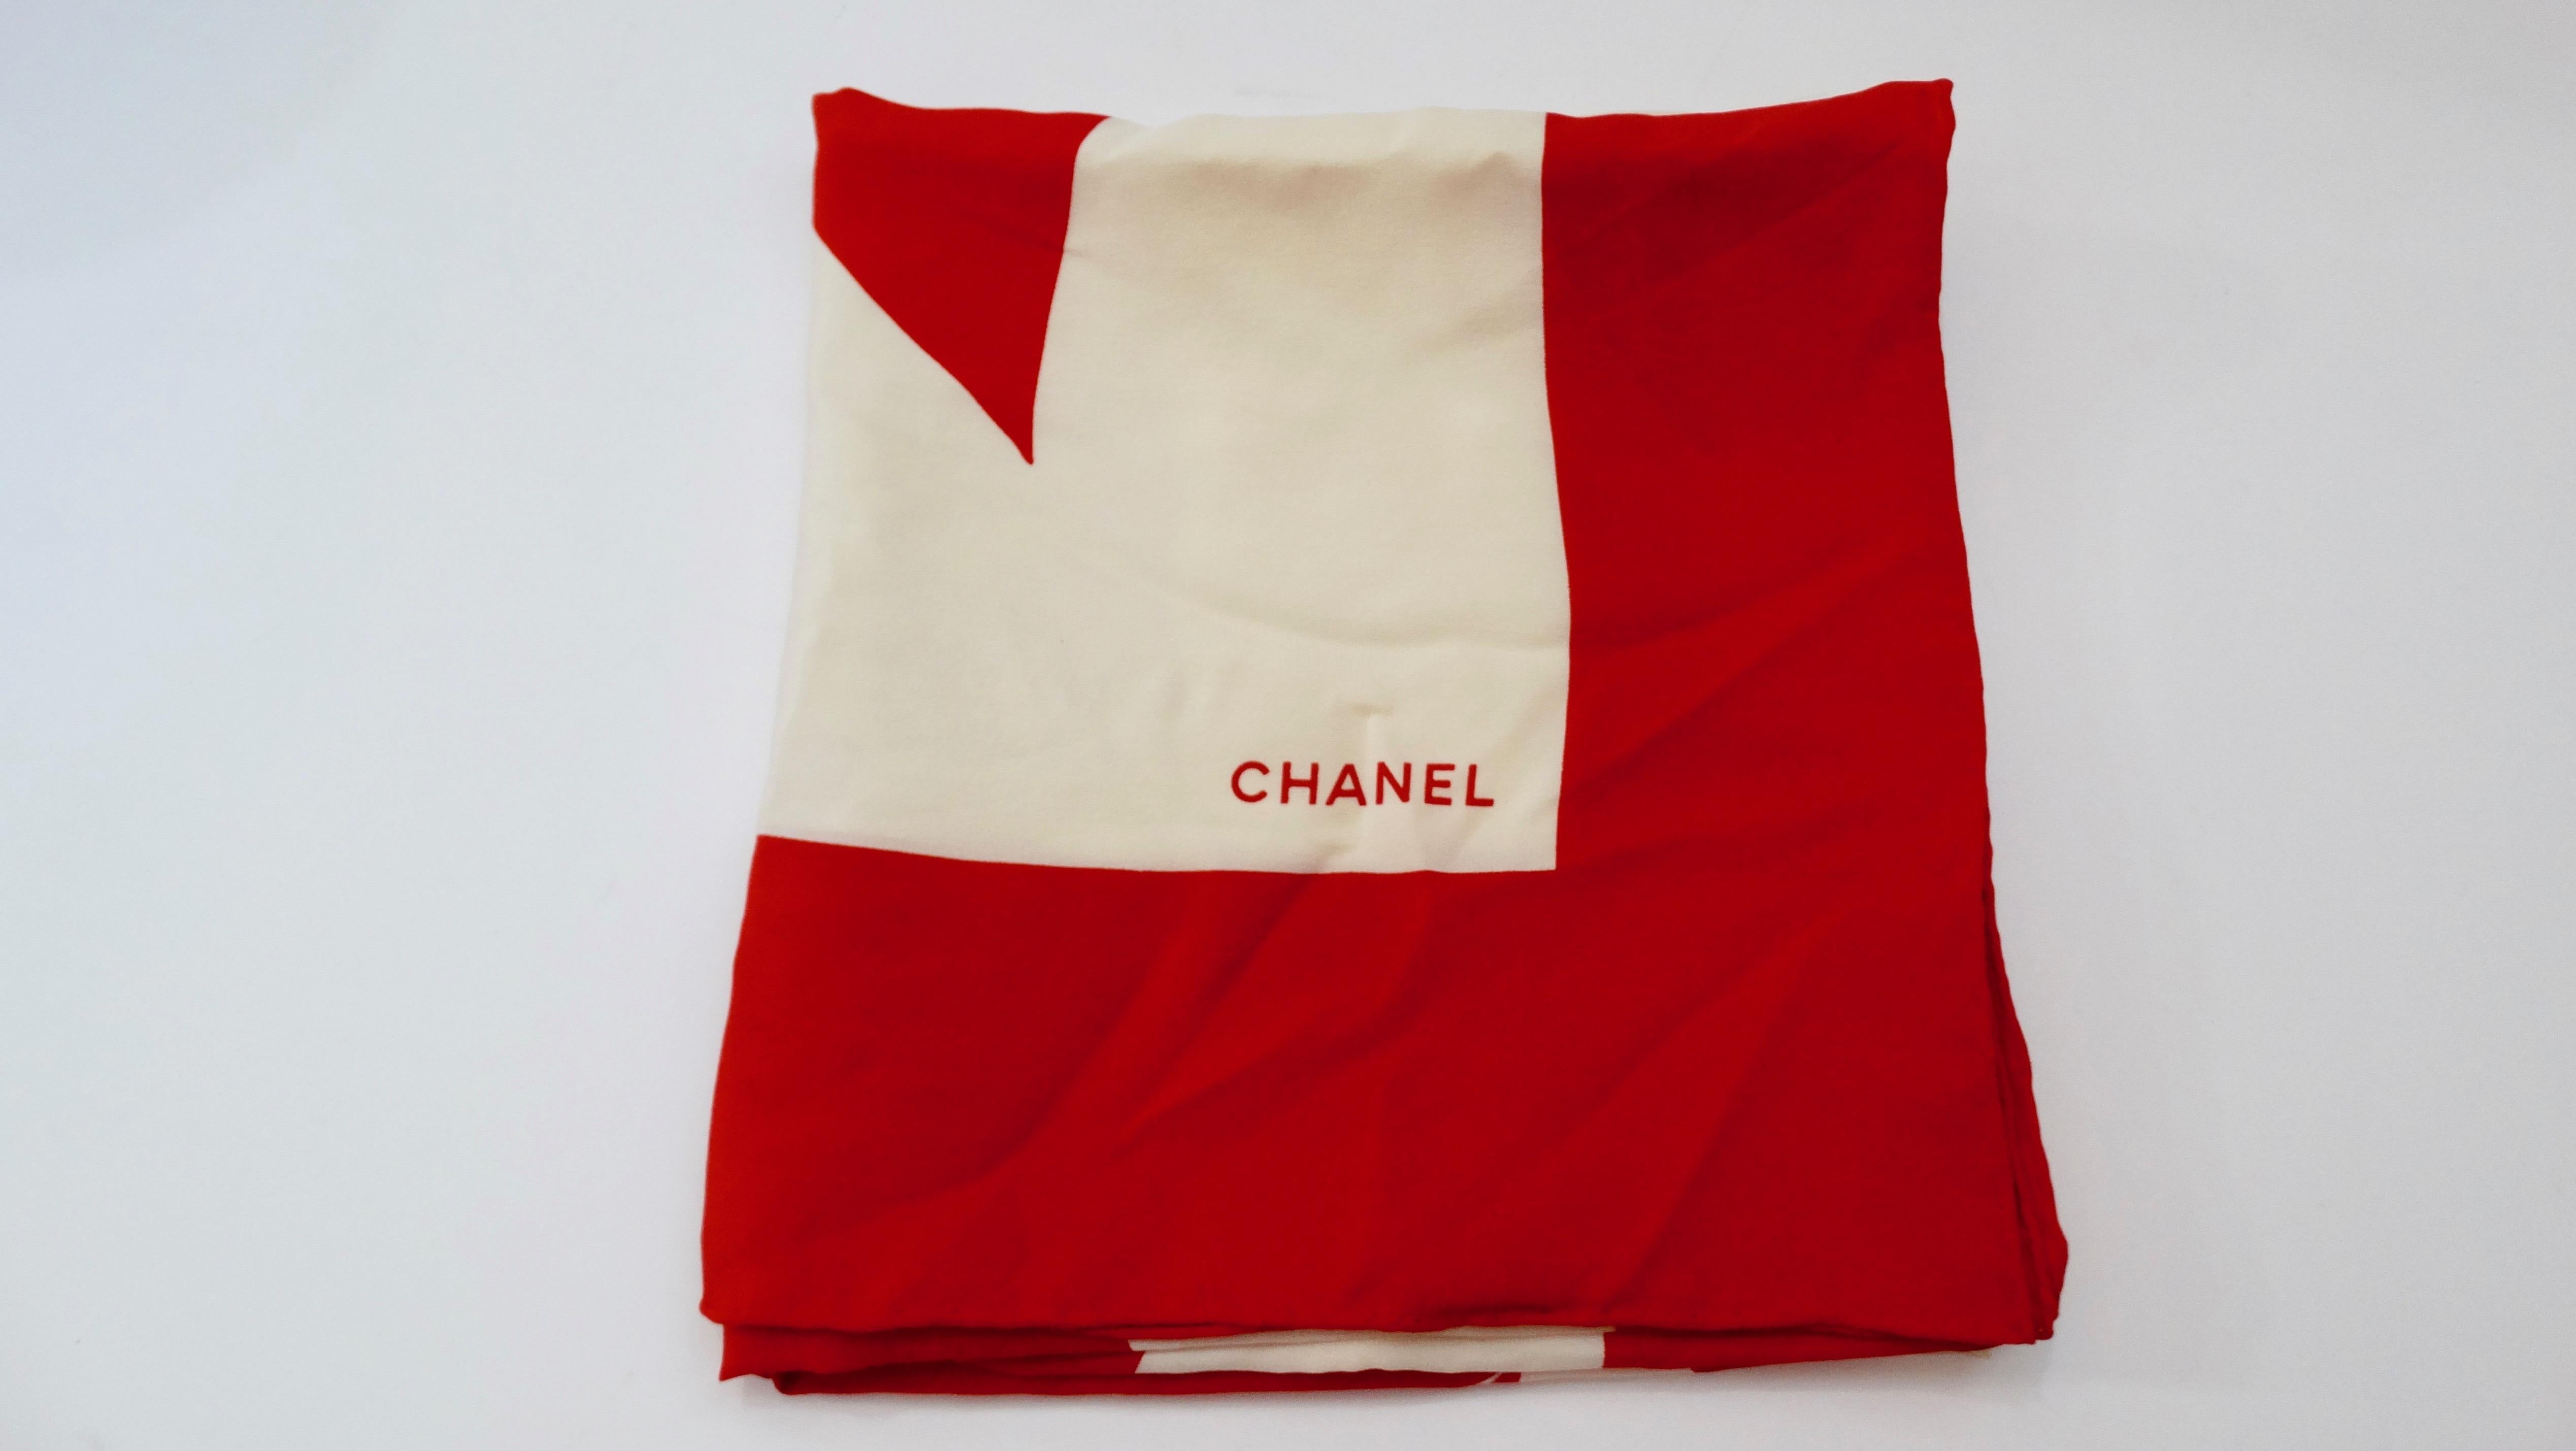 This scarf features the signature Chanel Camellia flower in creme-white and lipstick red in the center of a red bow on a creme-white background with a red border. It is made from crêpe de Chine, has hand-rolled edges and is signed 